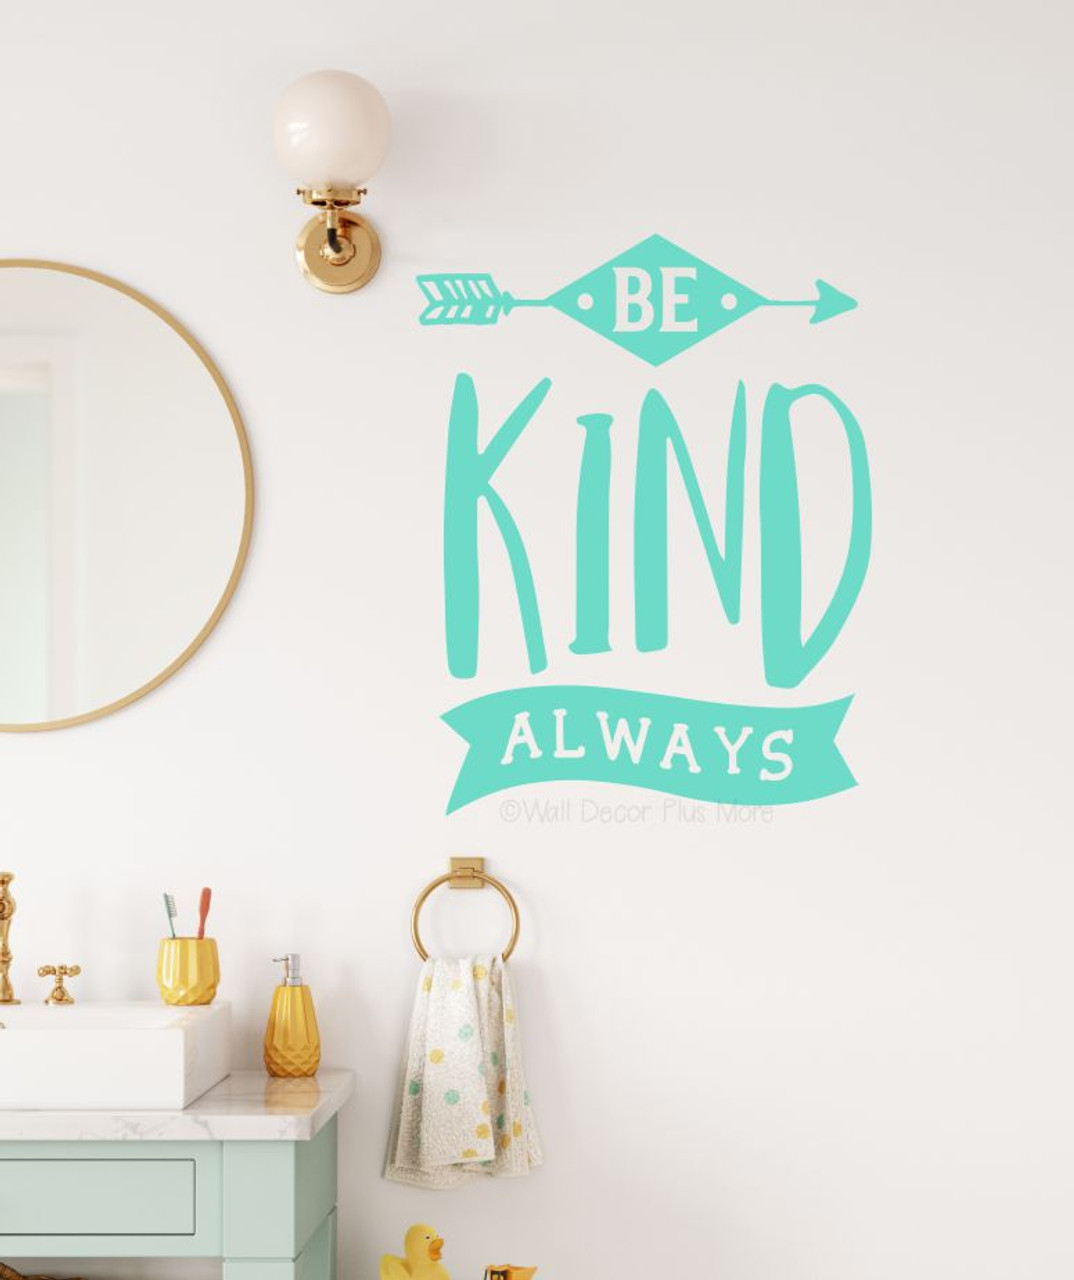 Inspiring Wall Art Quote Always Be Kind School Kids Decal Decor